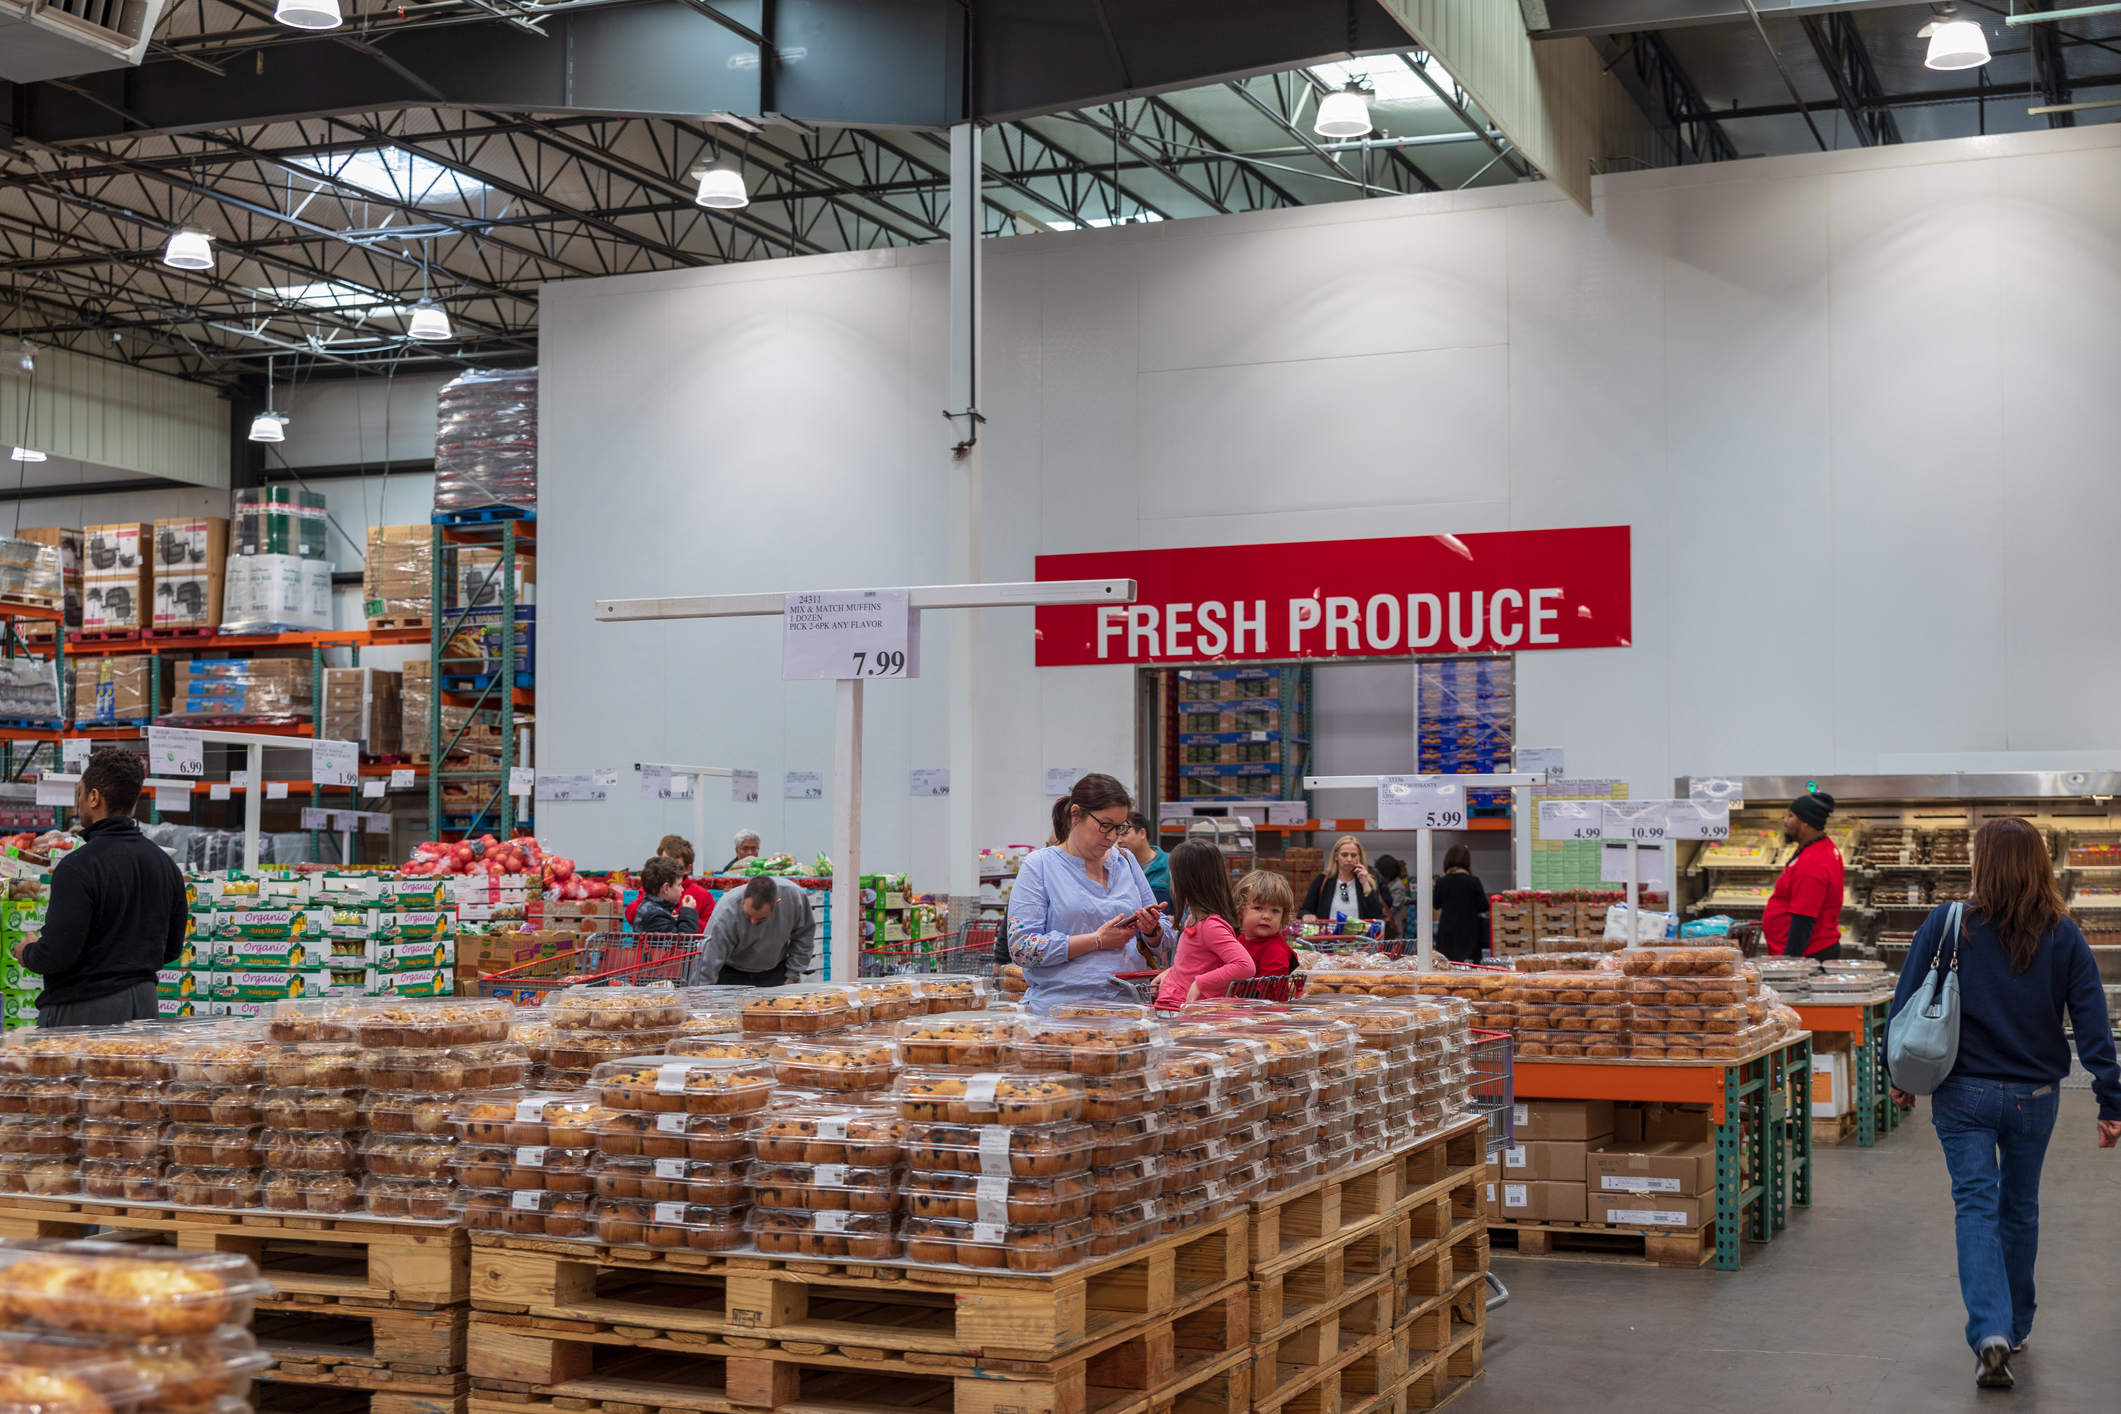 Shoppers at a warehouse store with &quot;FRESH PRODUCE&quot; sign, browsing items on pallets